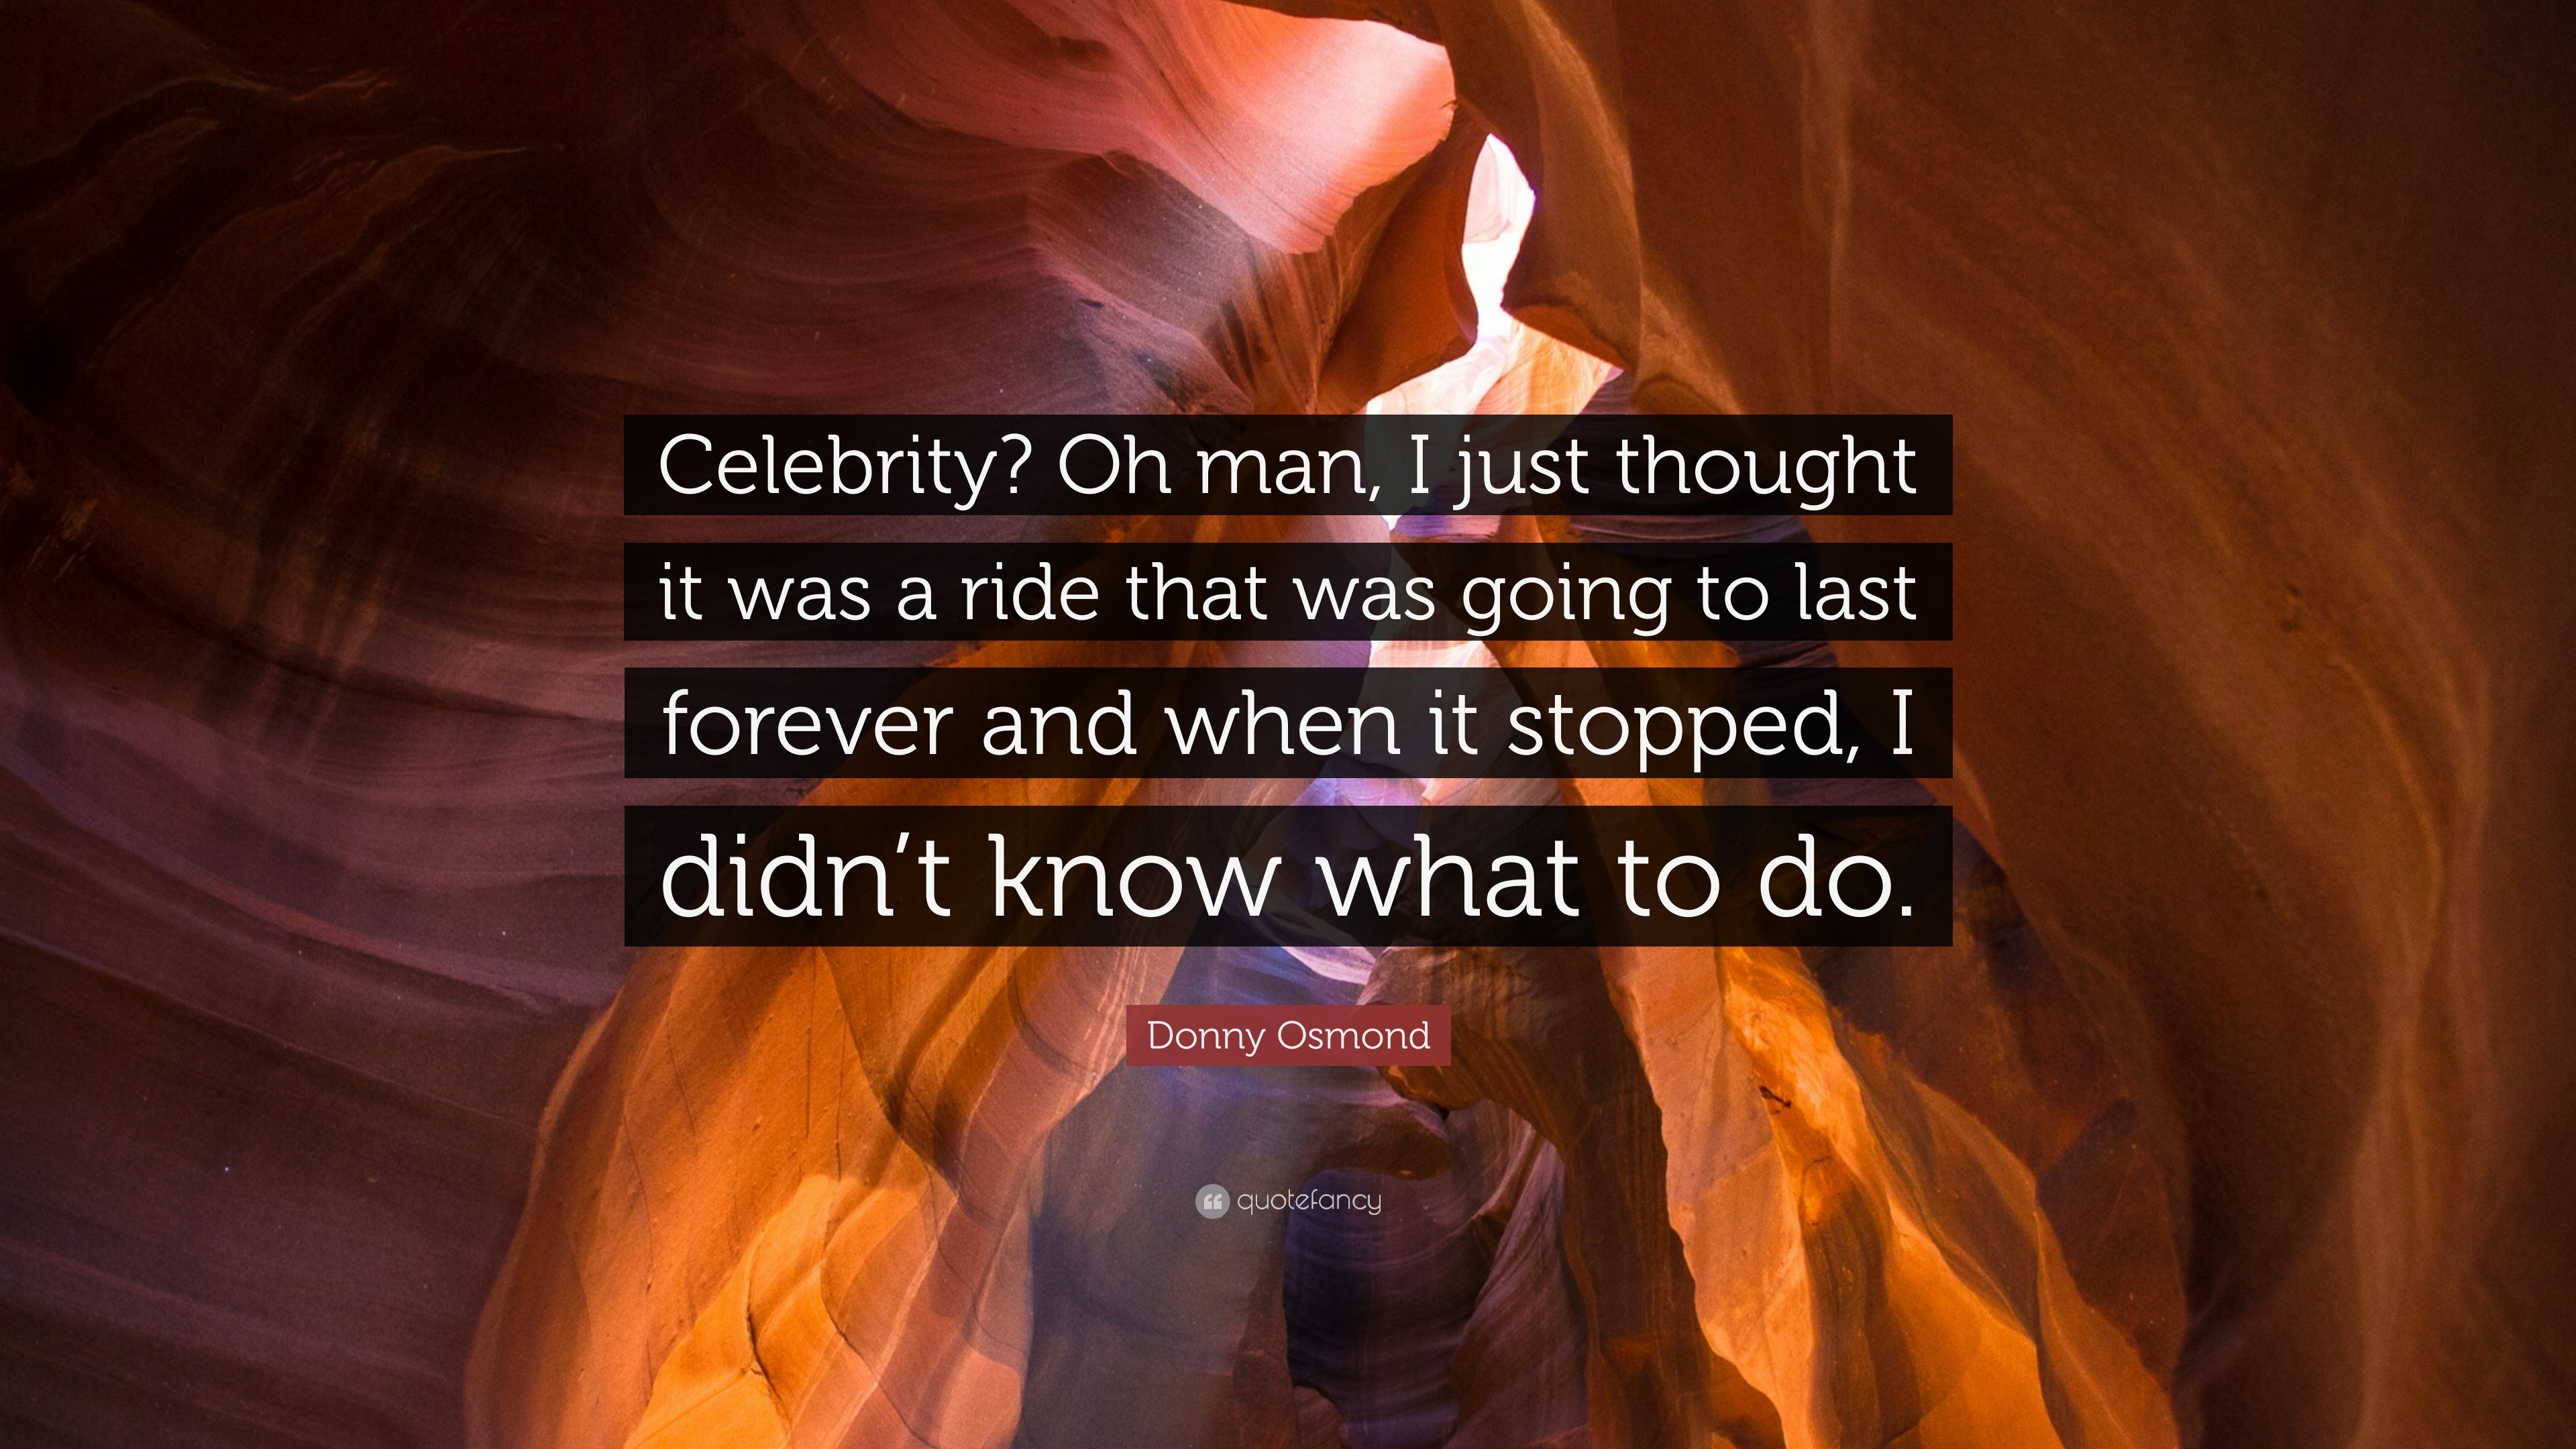 Donny Osmond Quote: “Celebrity? Oh man, I just thought it was a ride that  was going to last forever and when it stopped, I didn't know what t...”